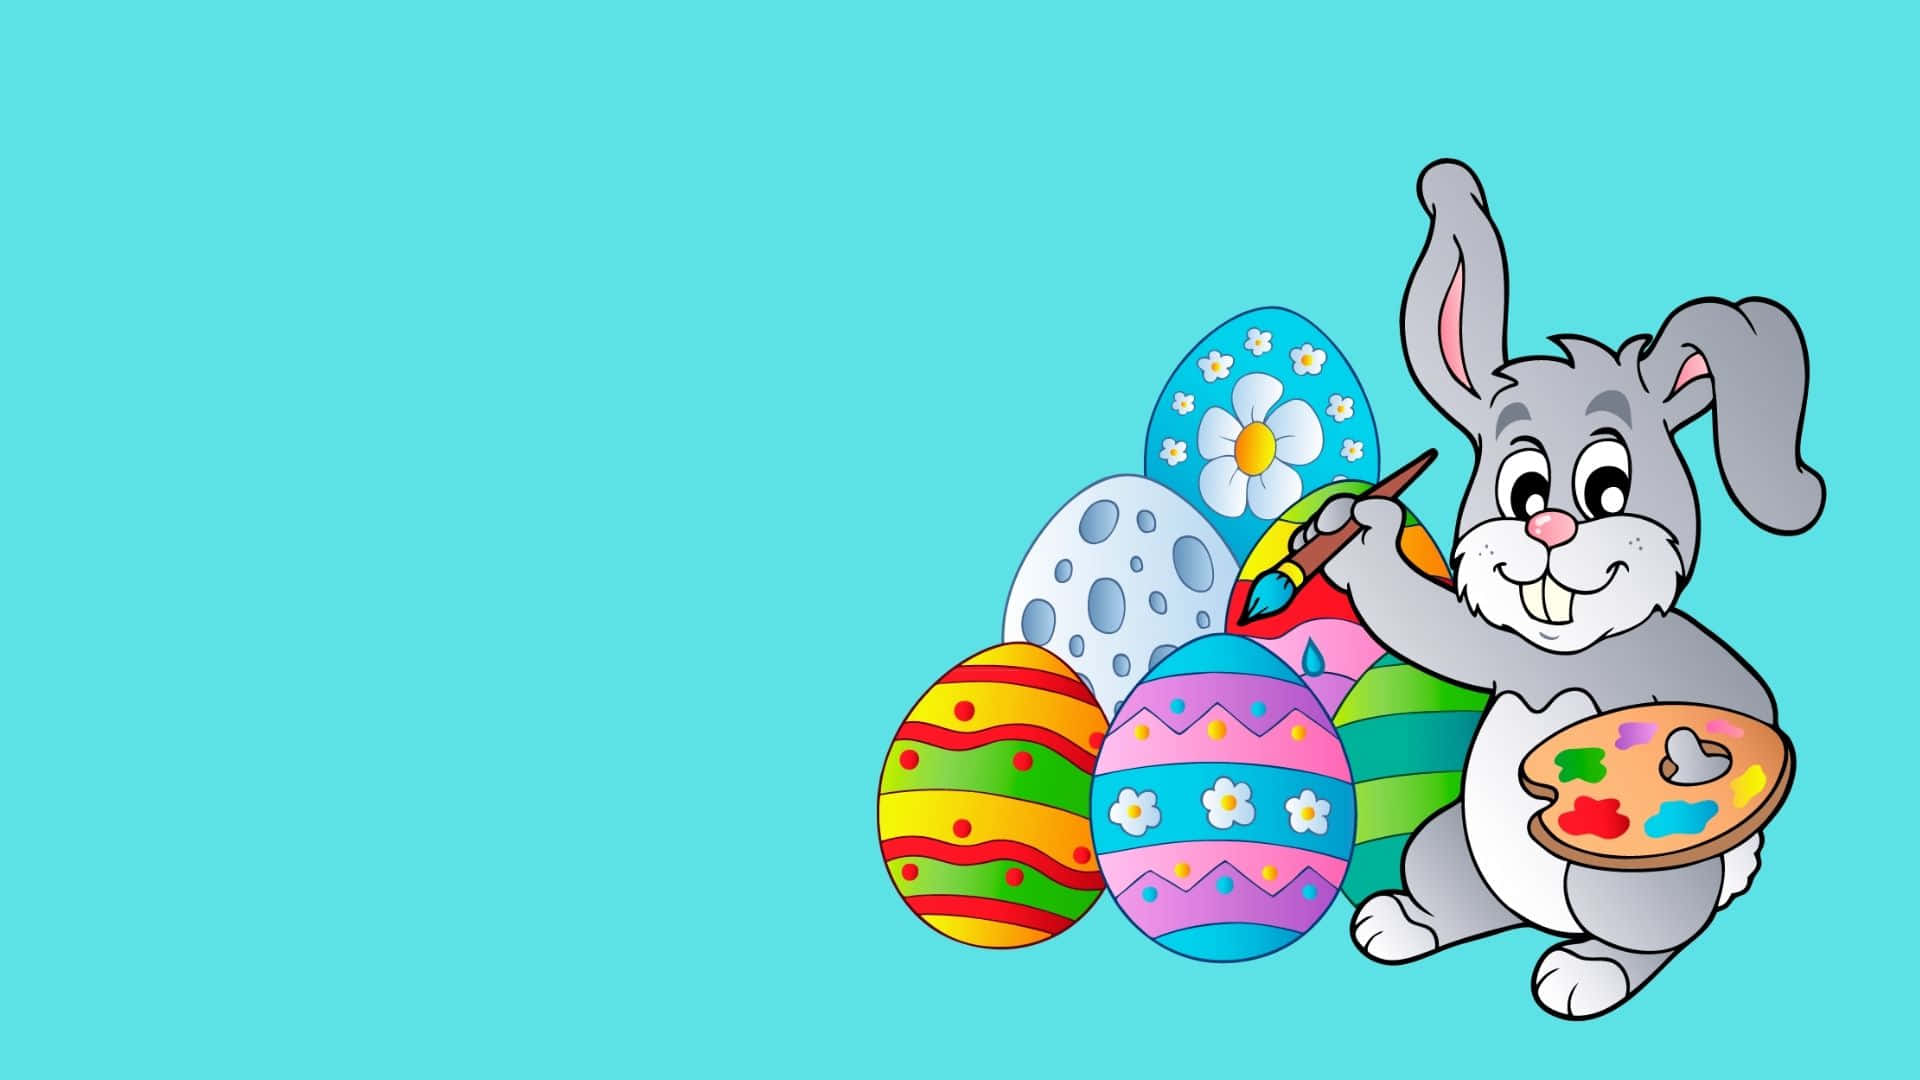 Don't Be Late! The Easter Bunny Waits Eagerly For You! Background